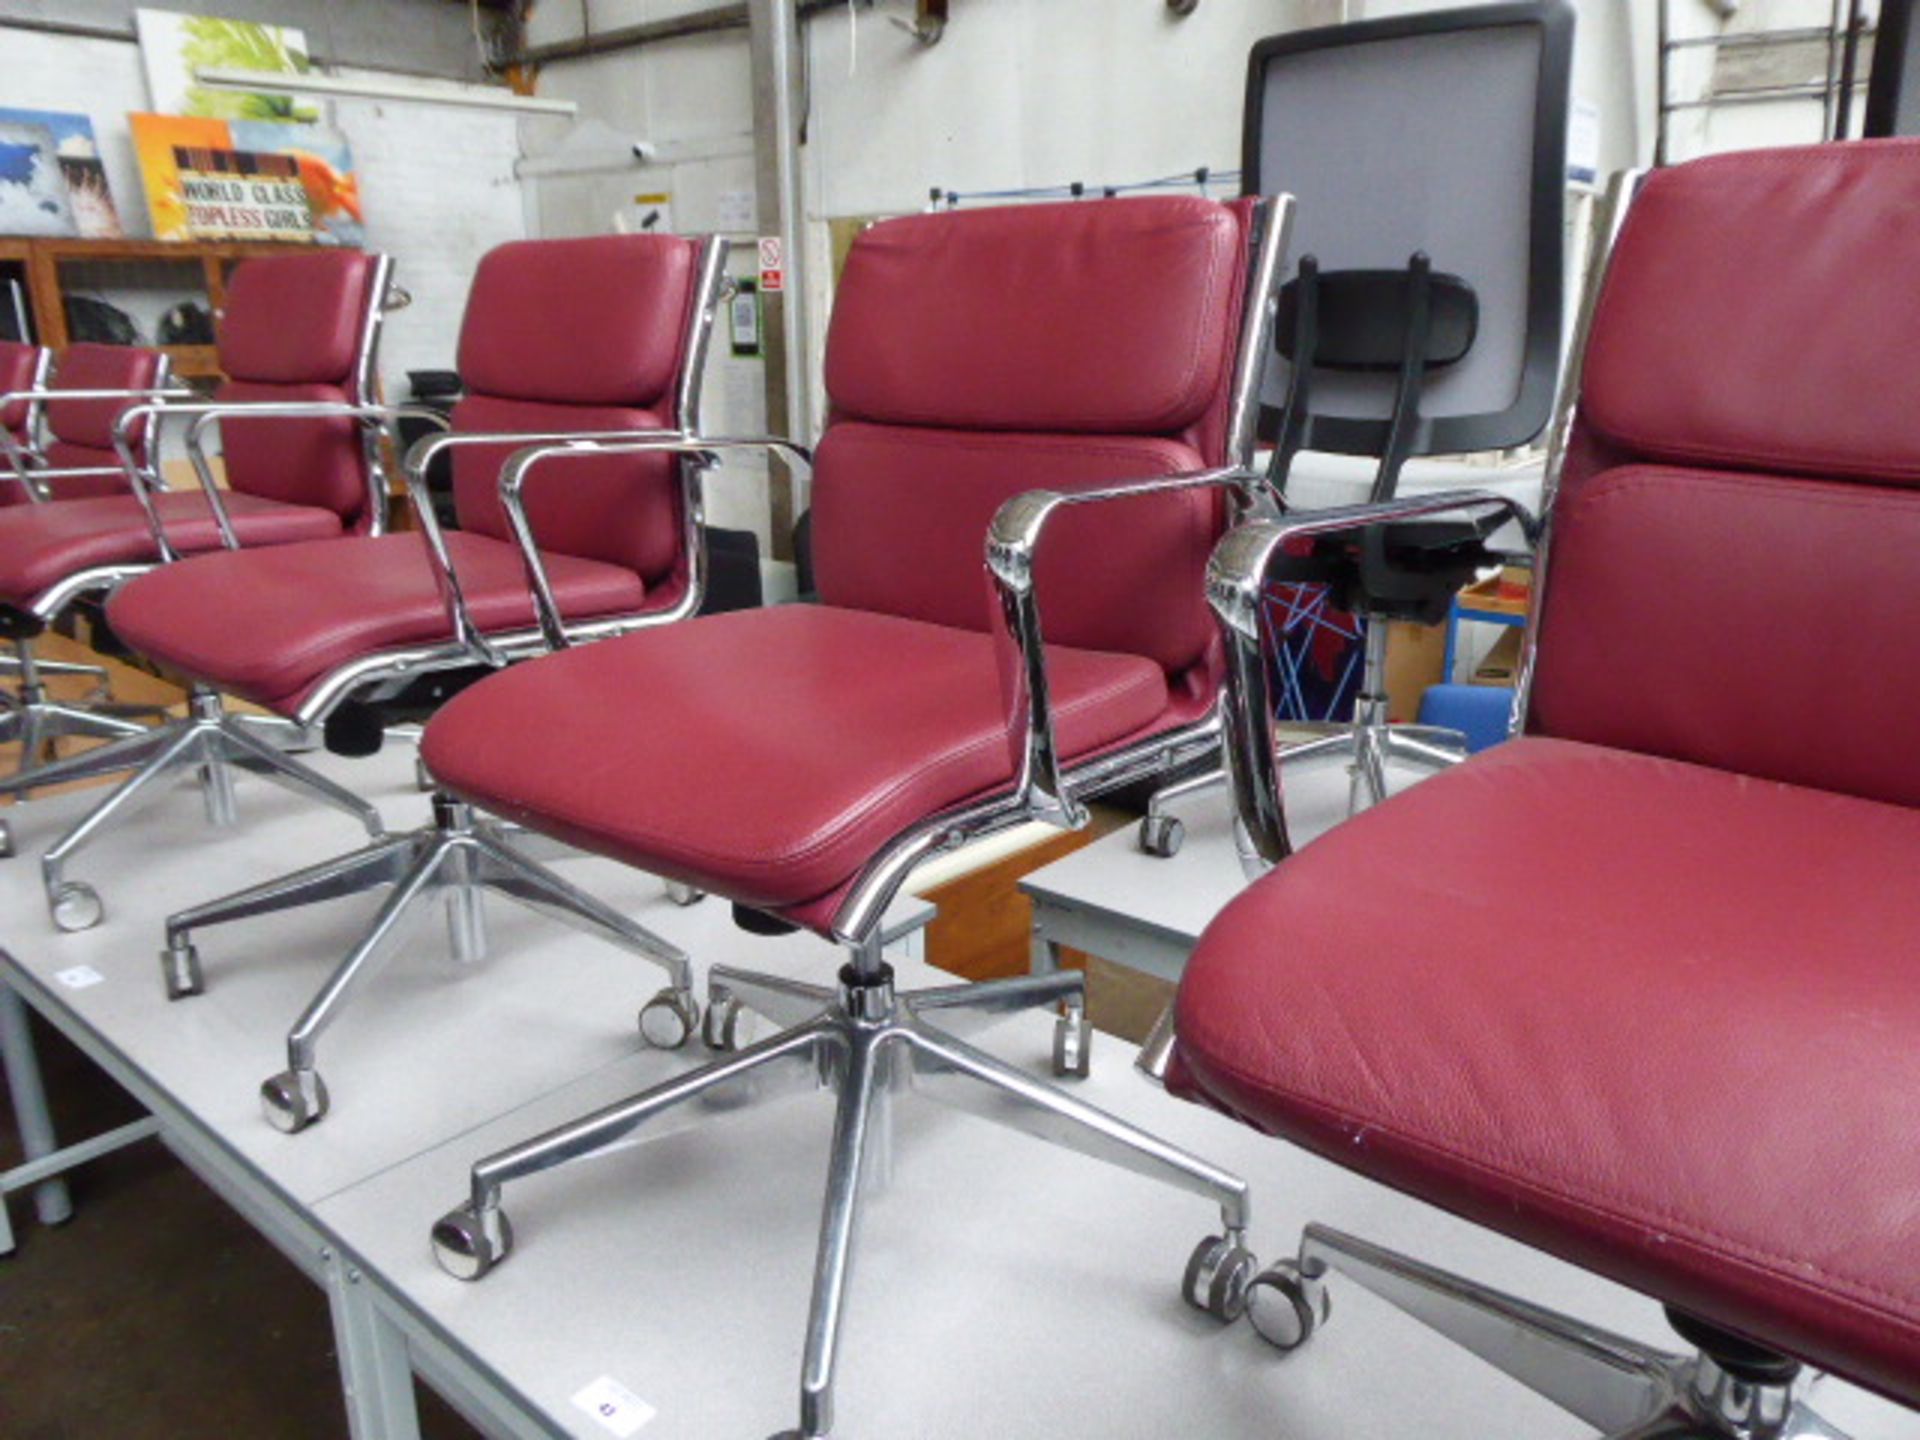 4 Milani Charles Eames style soft pad swivel armchairs in burgundy leather (4 with castors)